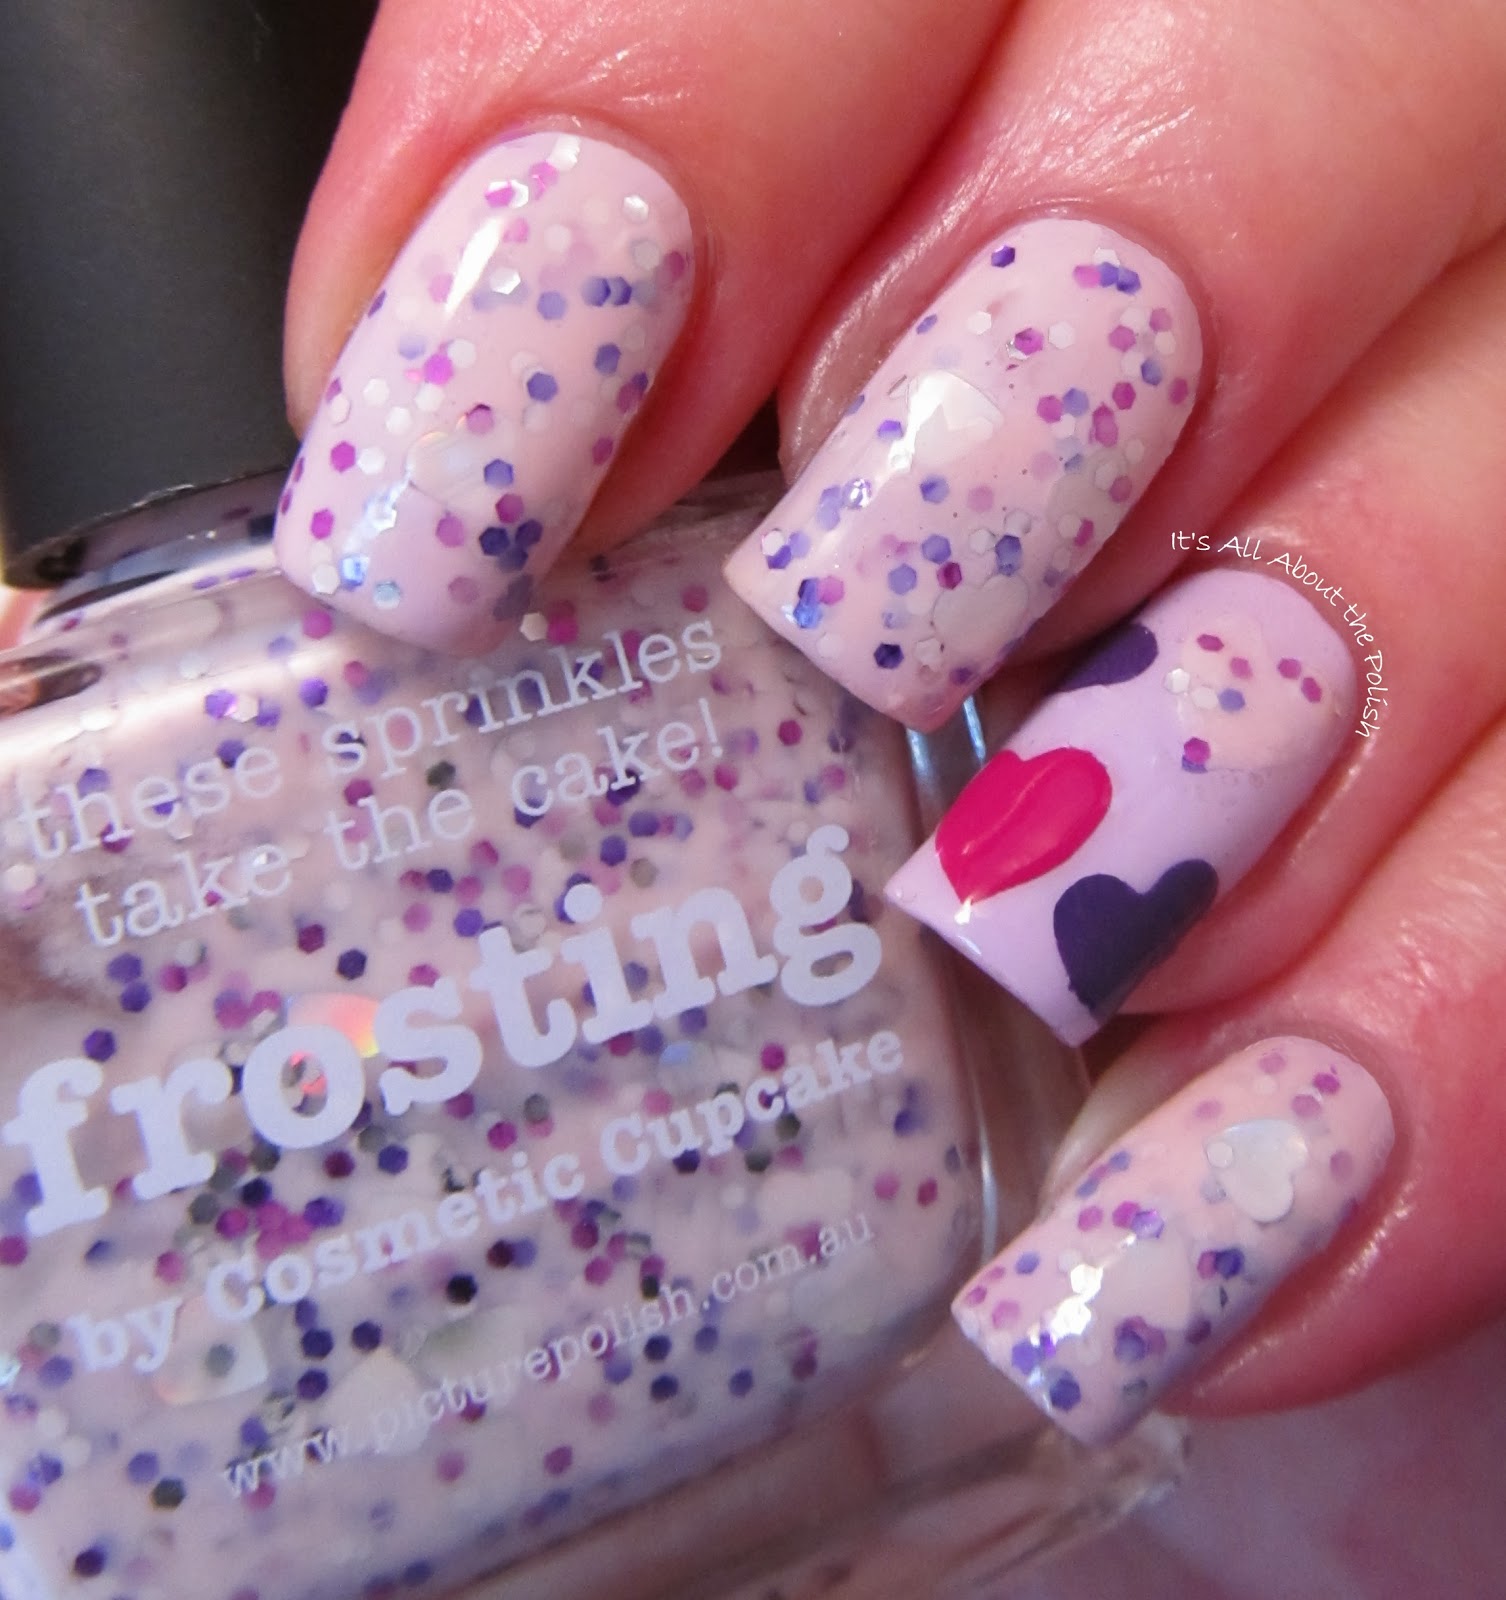 It's all about the polish: piCture pOlish - Frosting review